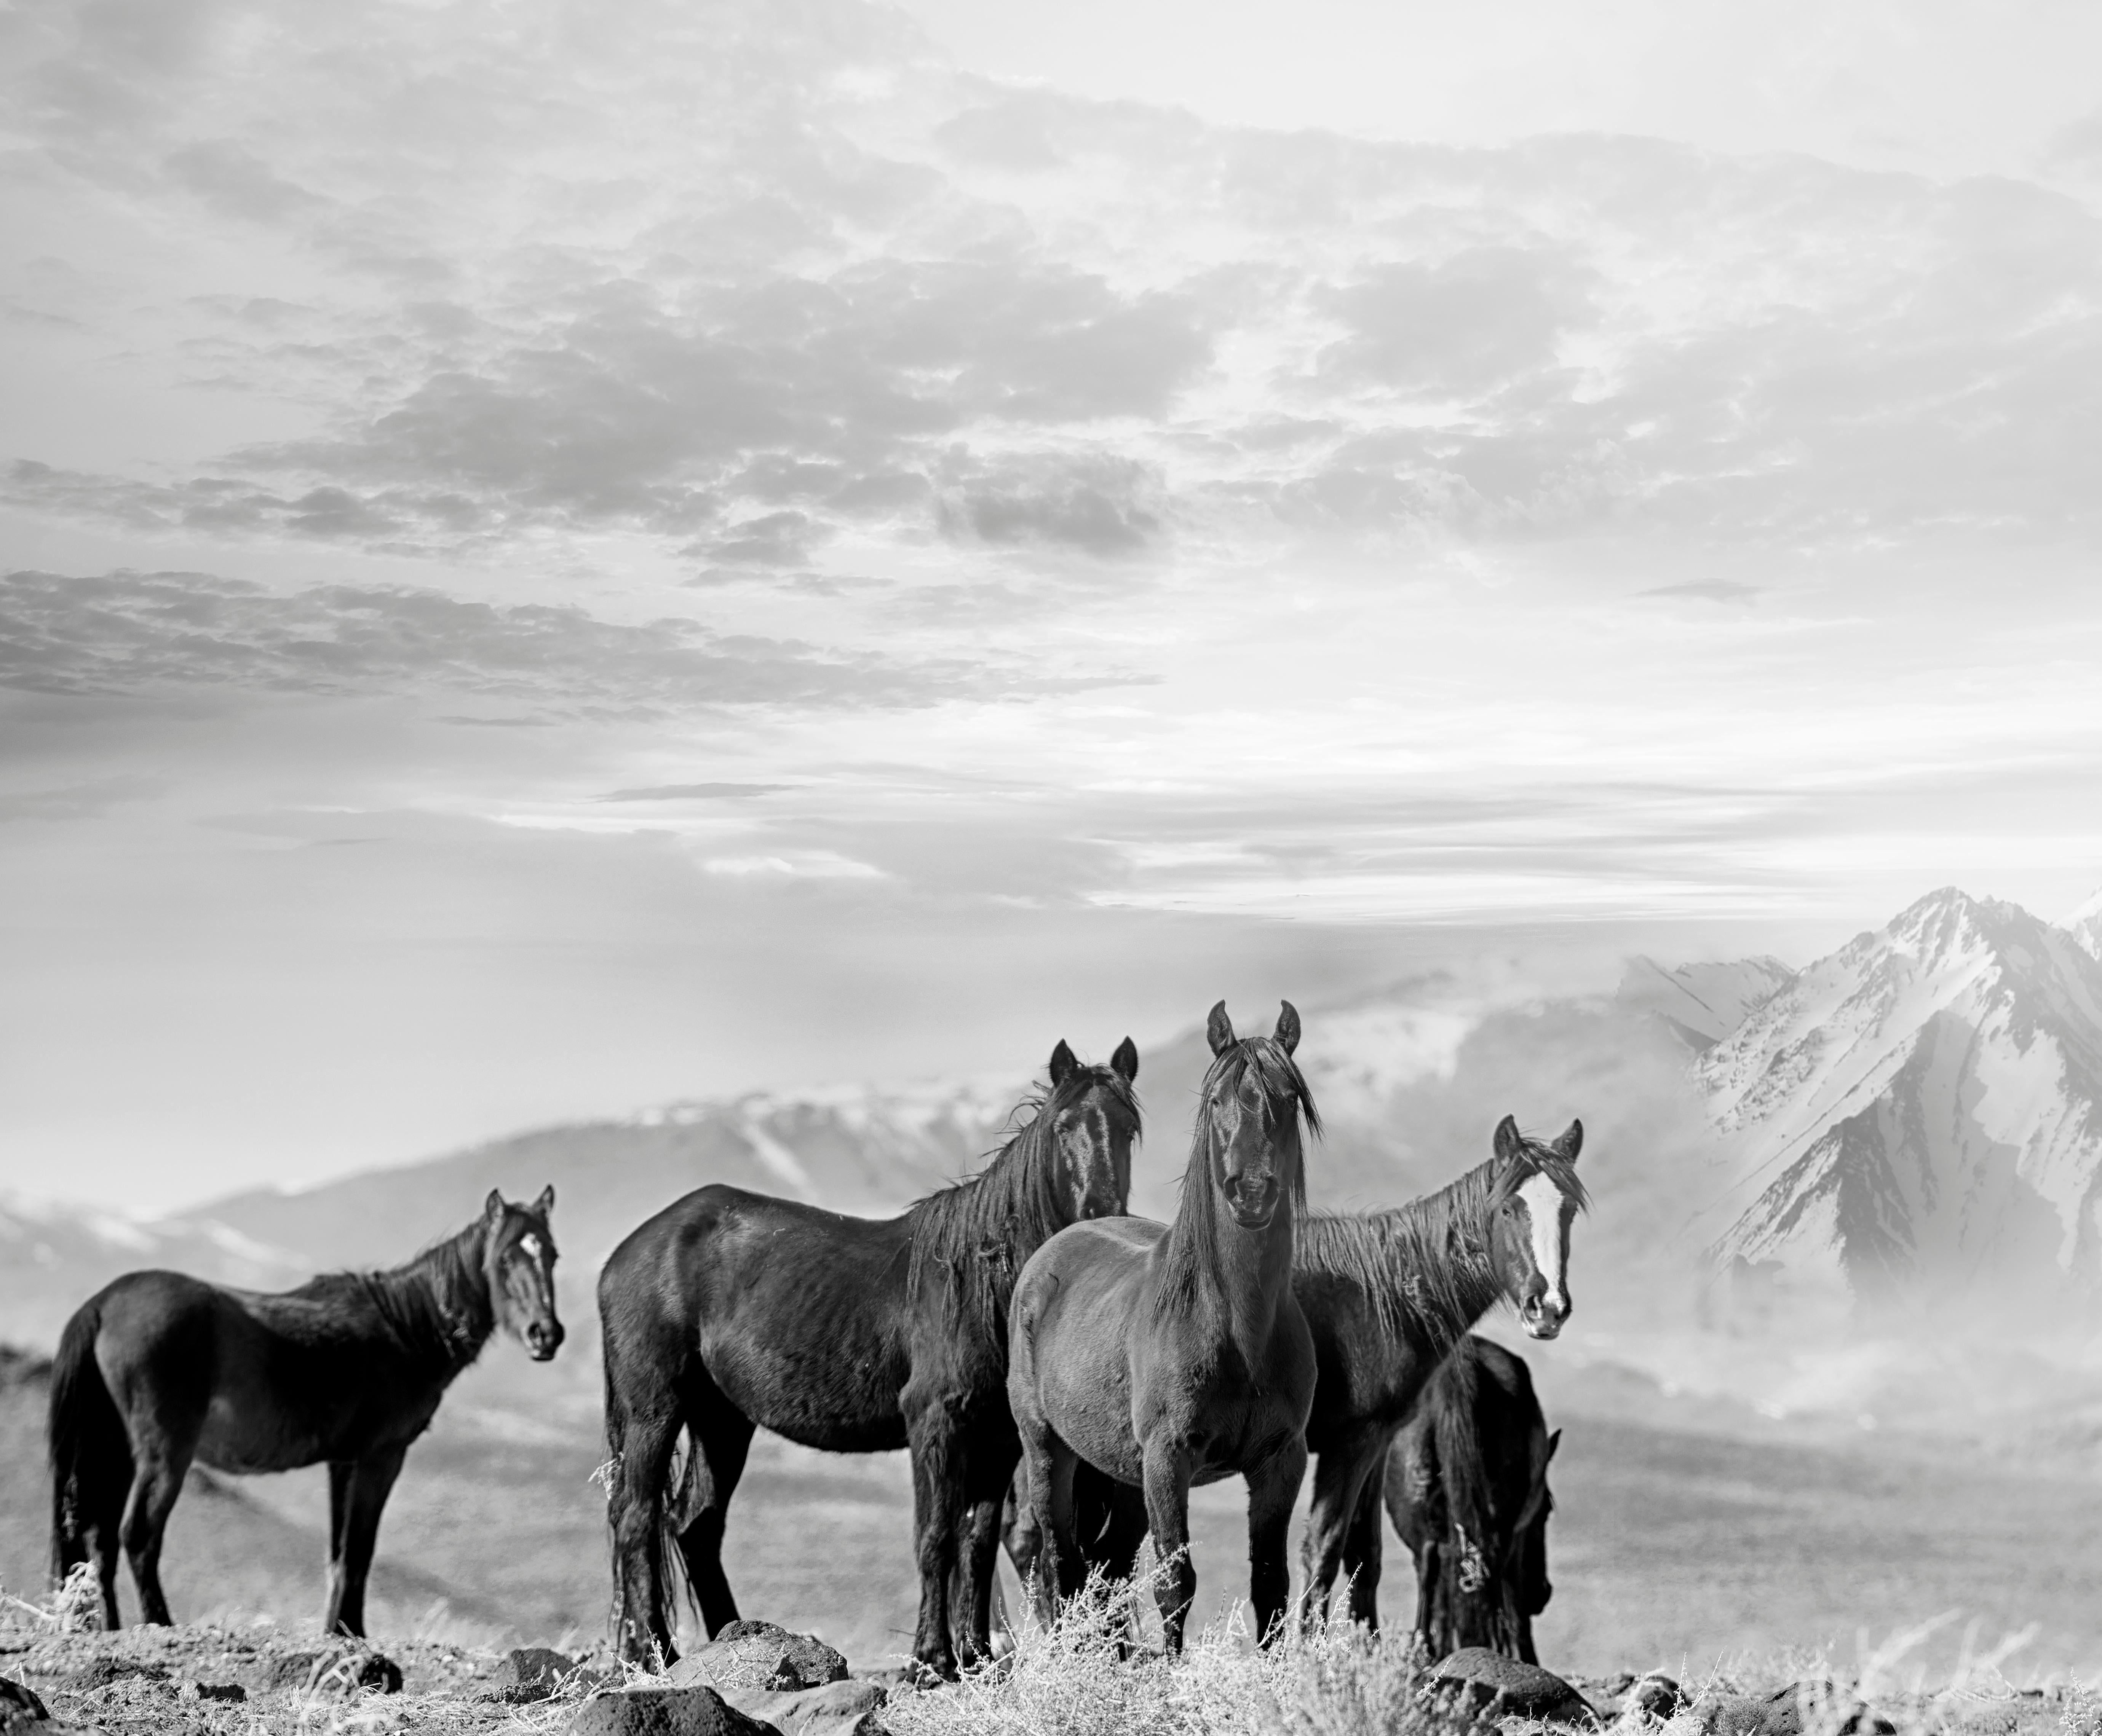 Shane Russeck Animal Print - High Sierra Mustangs, Black and White Photography, Wild Horses Photograph 40x60